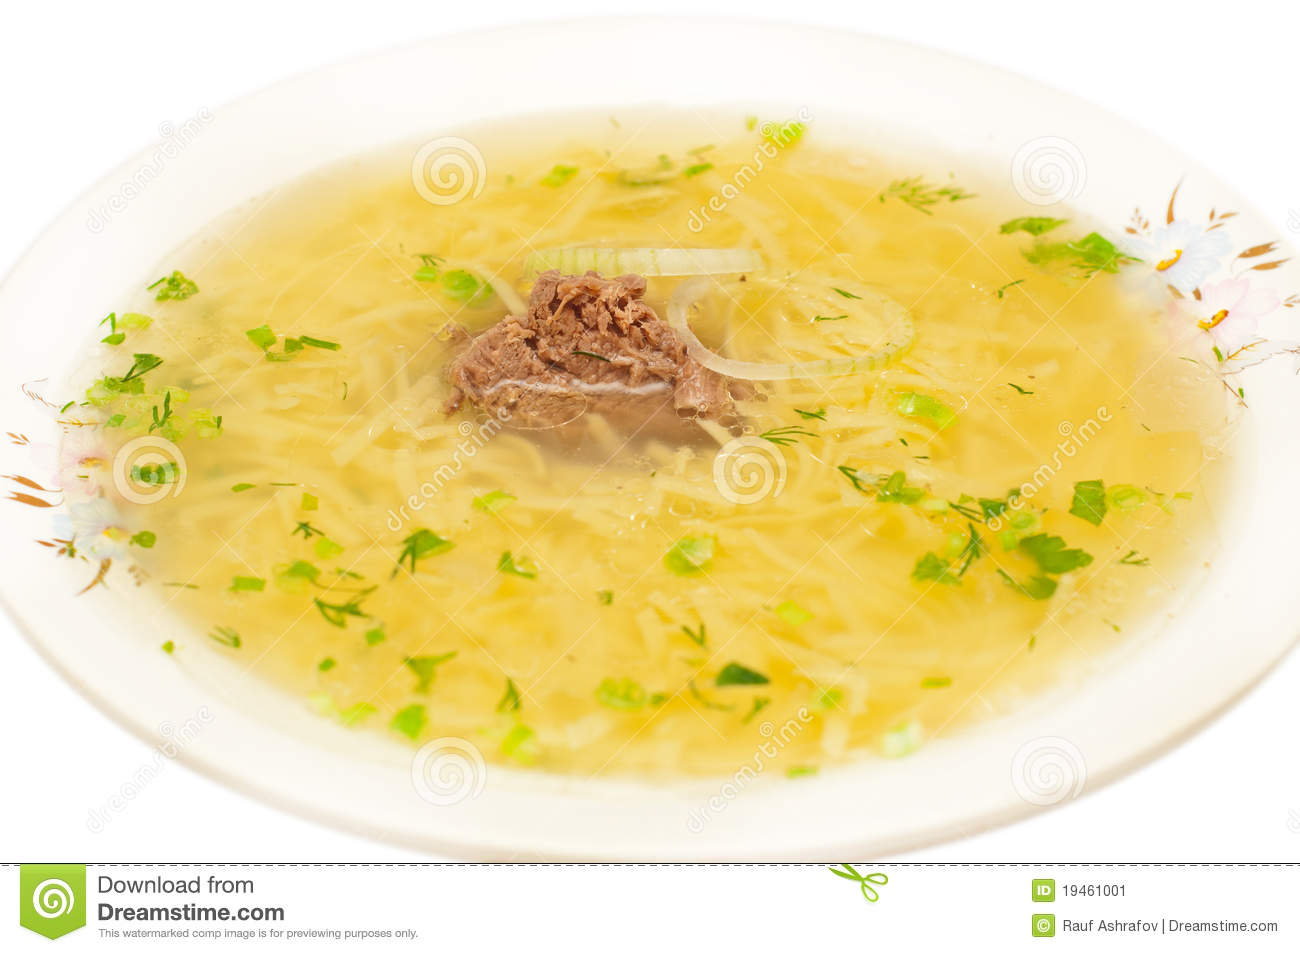 Chicken Noodle Soup   Broth Closeup Stock Image   Image  19461001